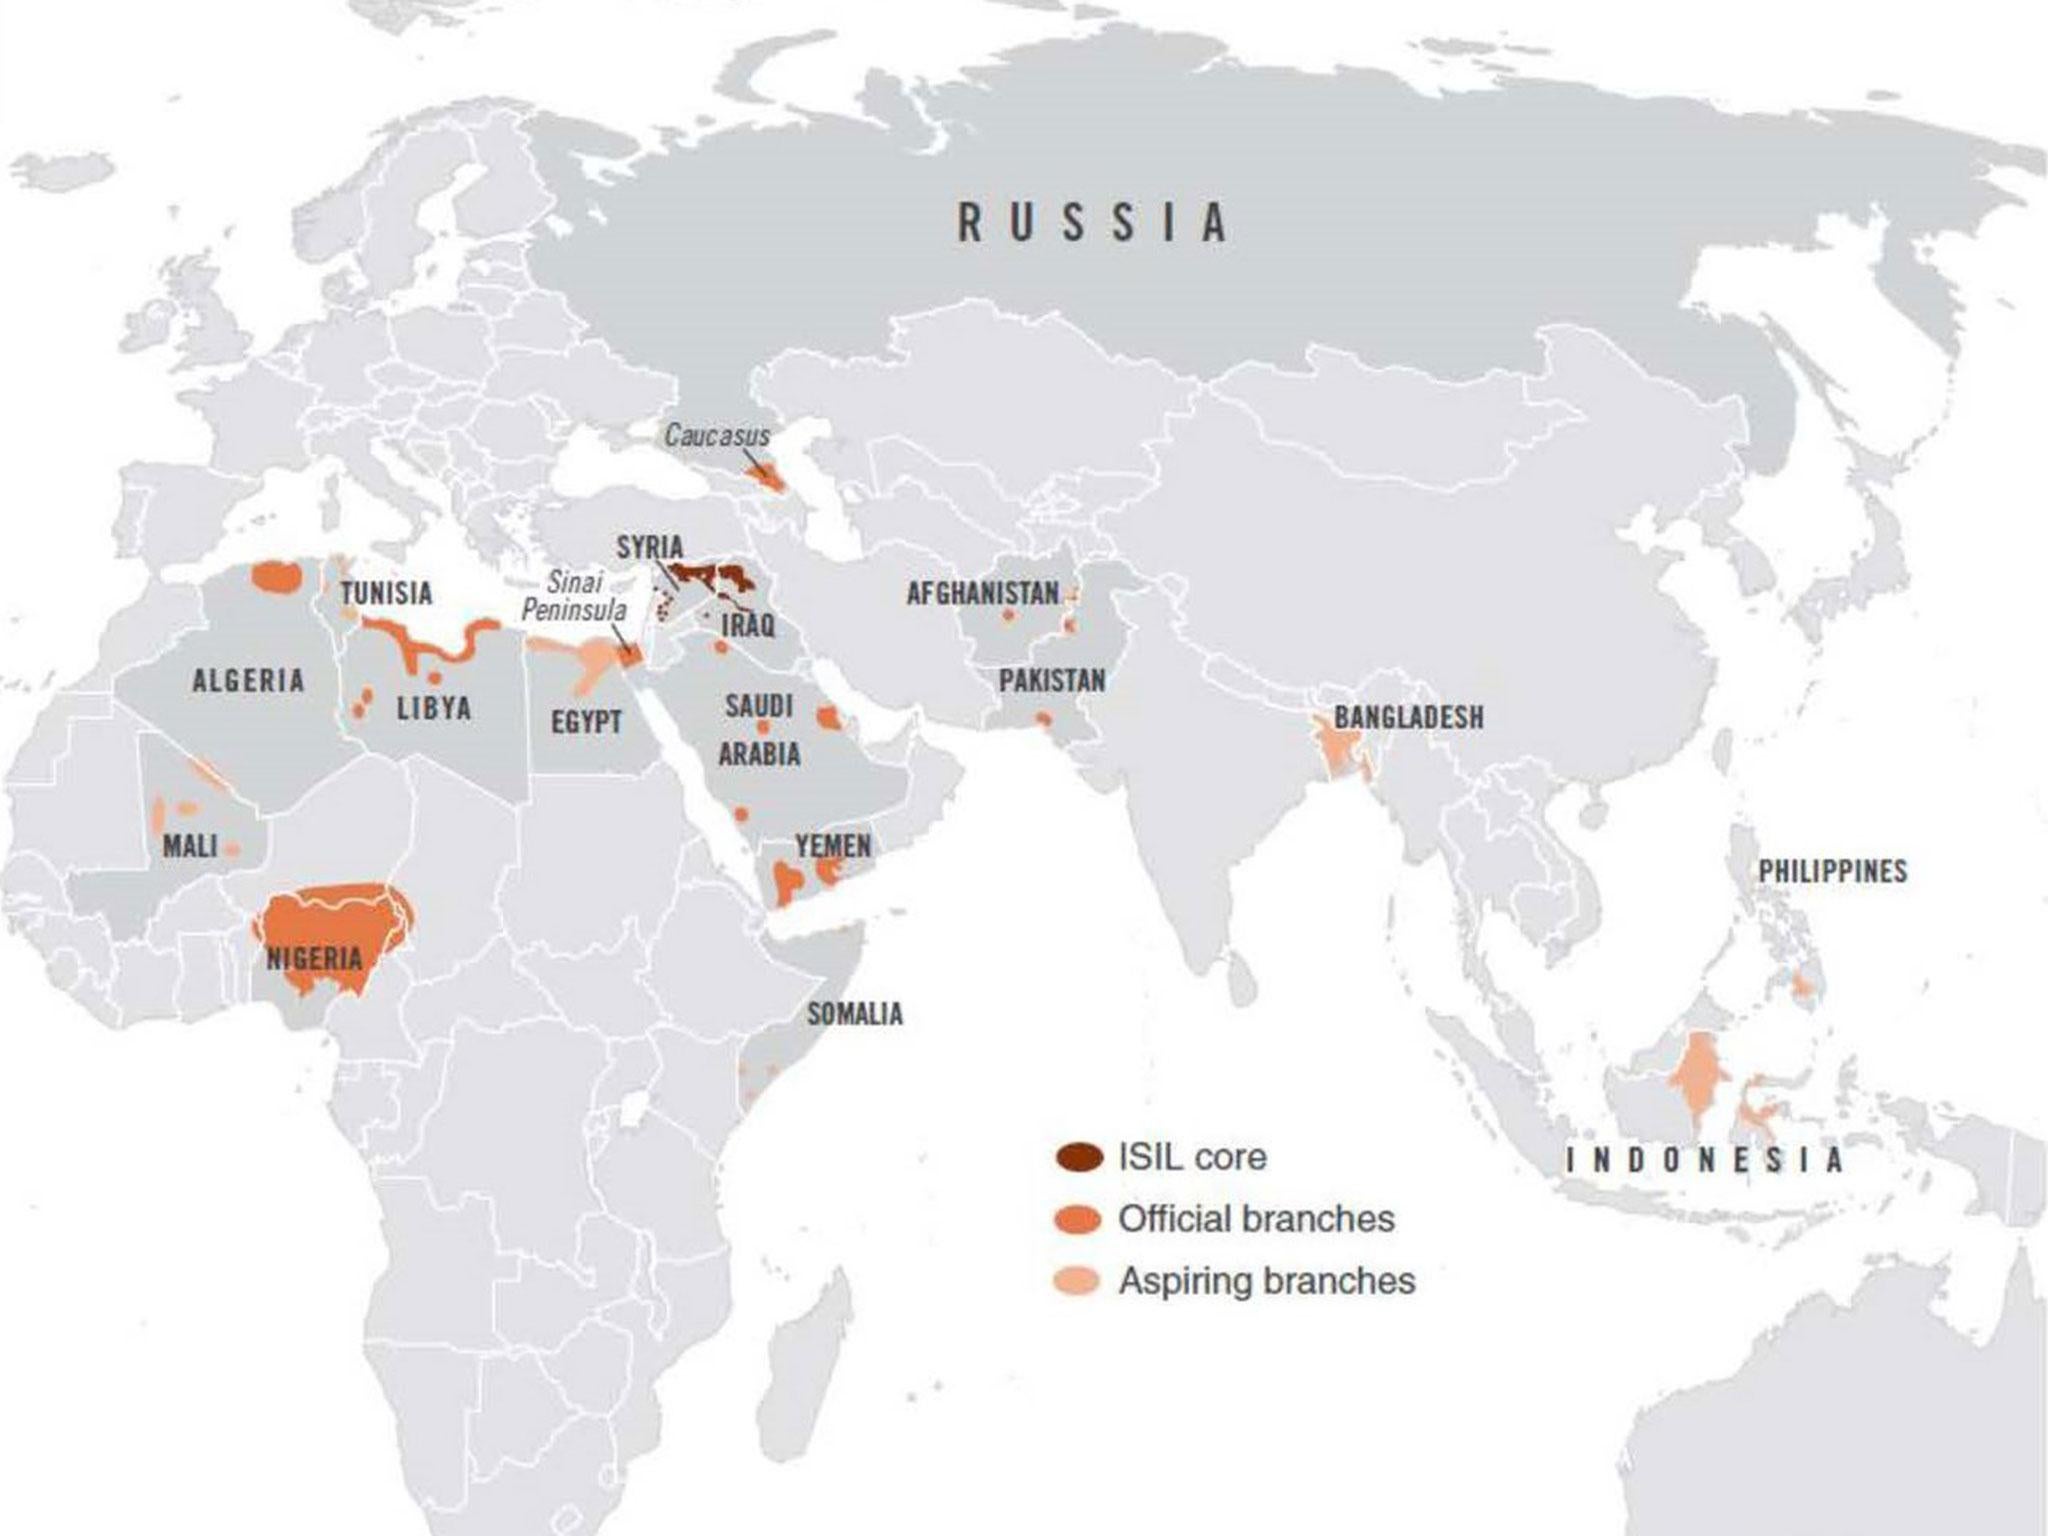 Counterterrorism heat map shows active Isis branches in 18 countries